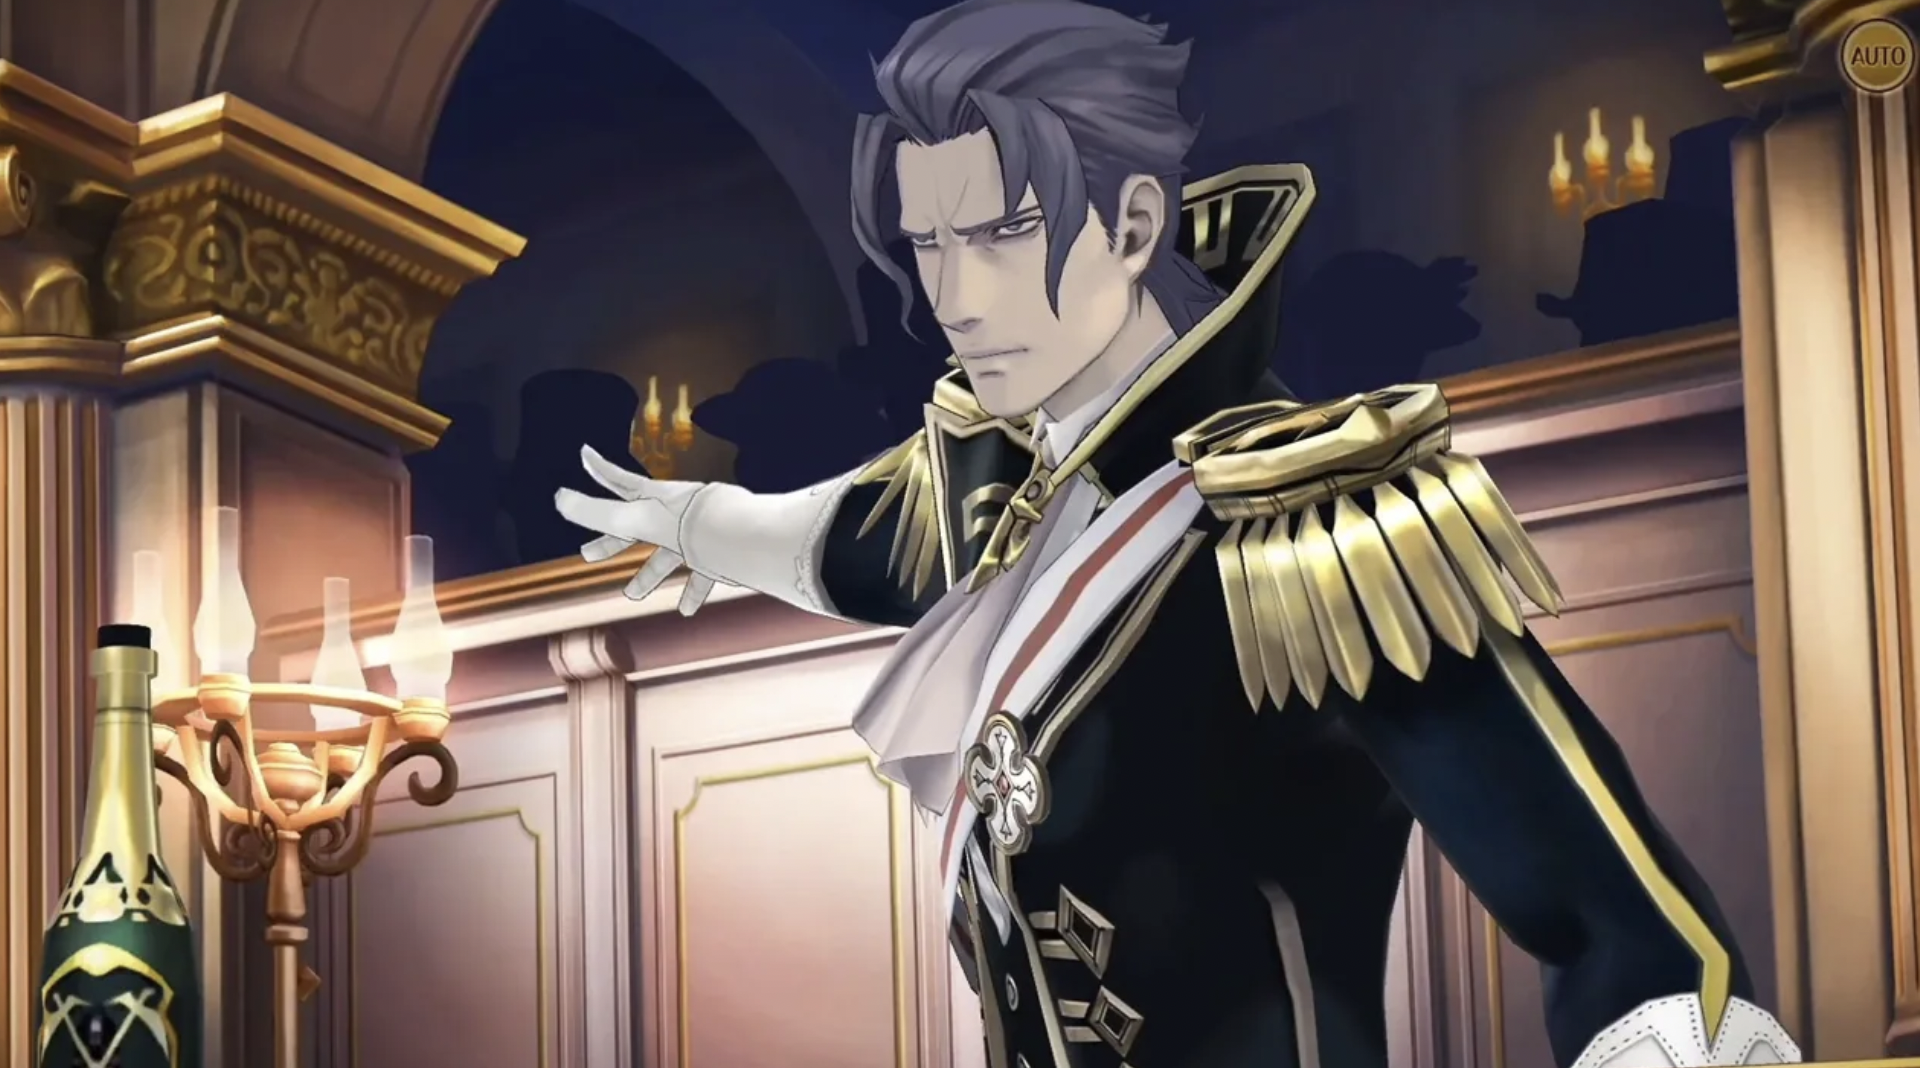 Buy The Great Ace Attorney Chronicles from the Humble Store